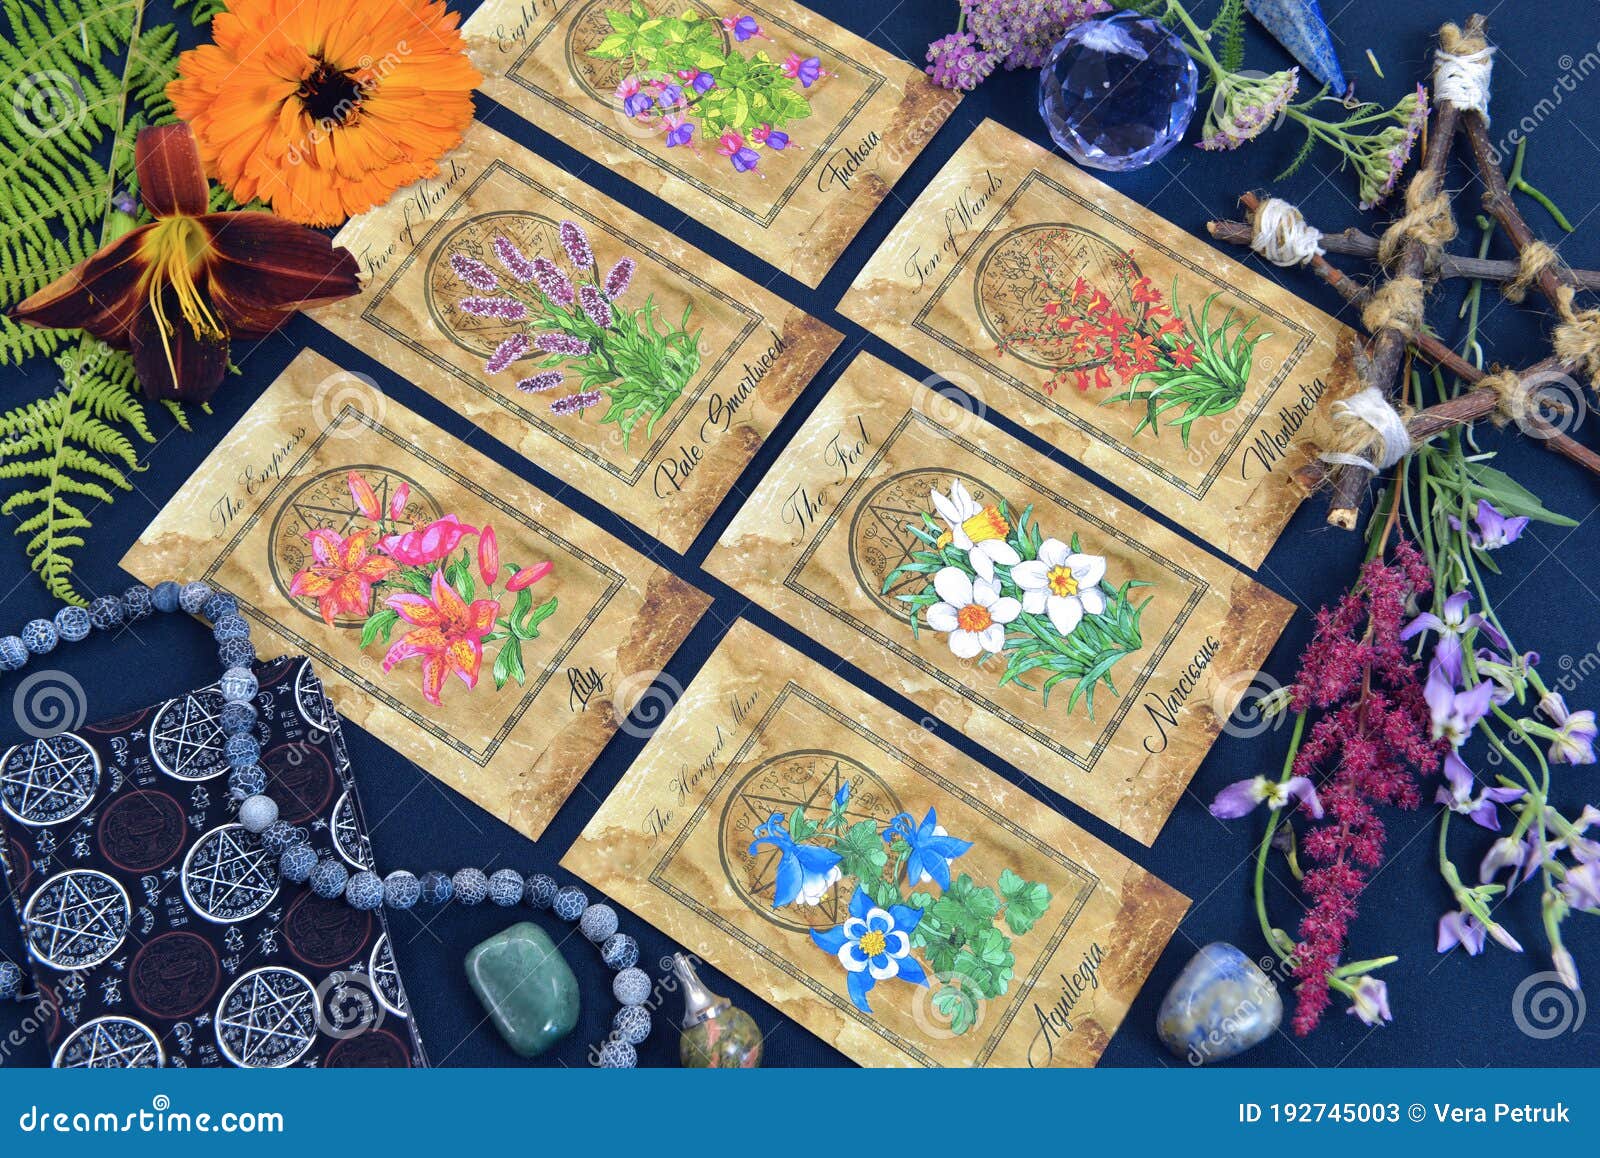 Mystic Still Life with Tarot Cards, Pentagram and Flowers on Witch